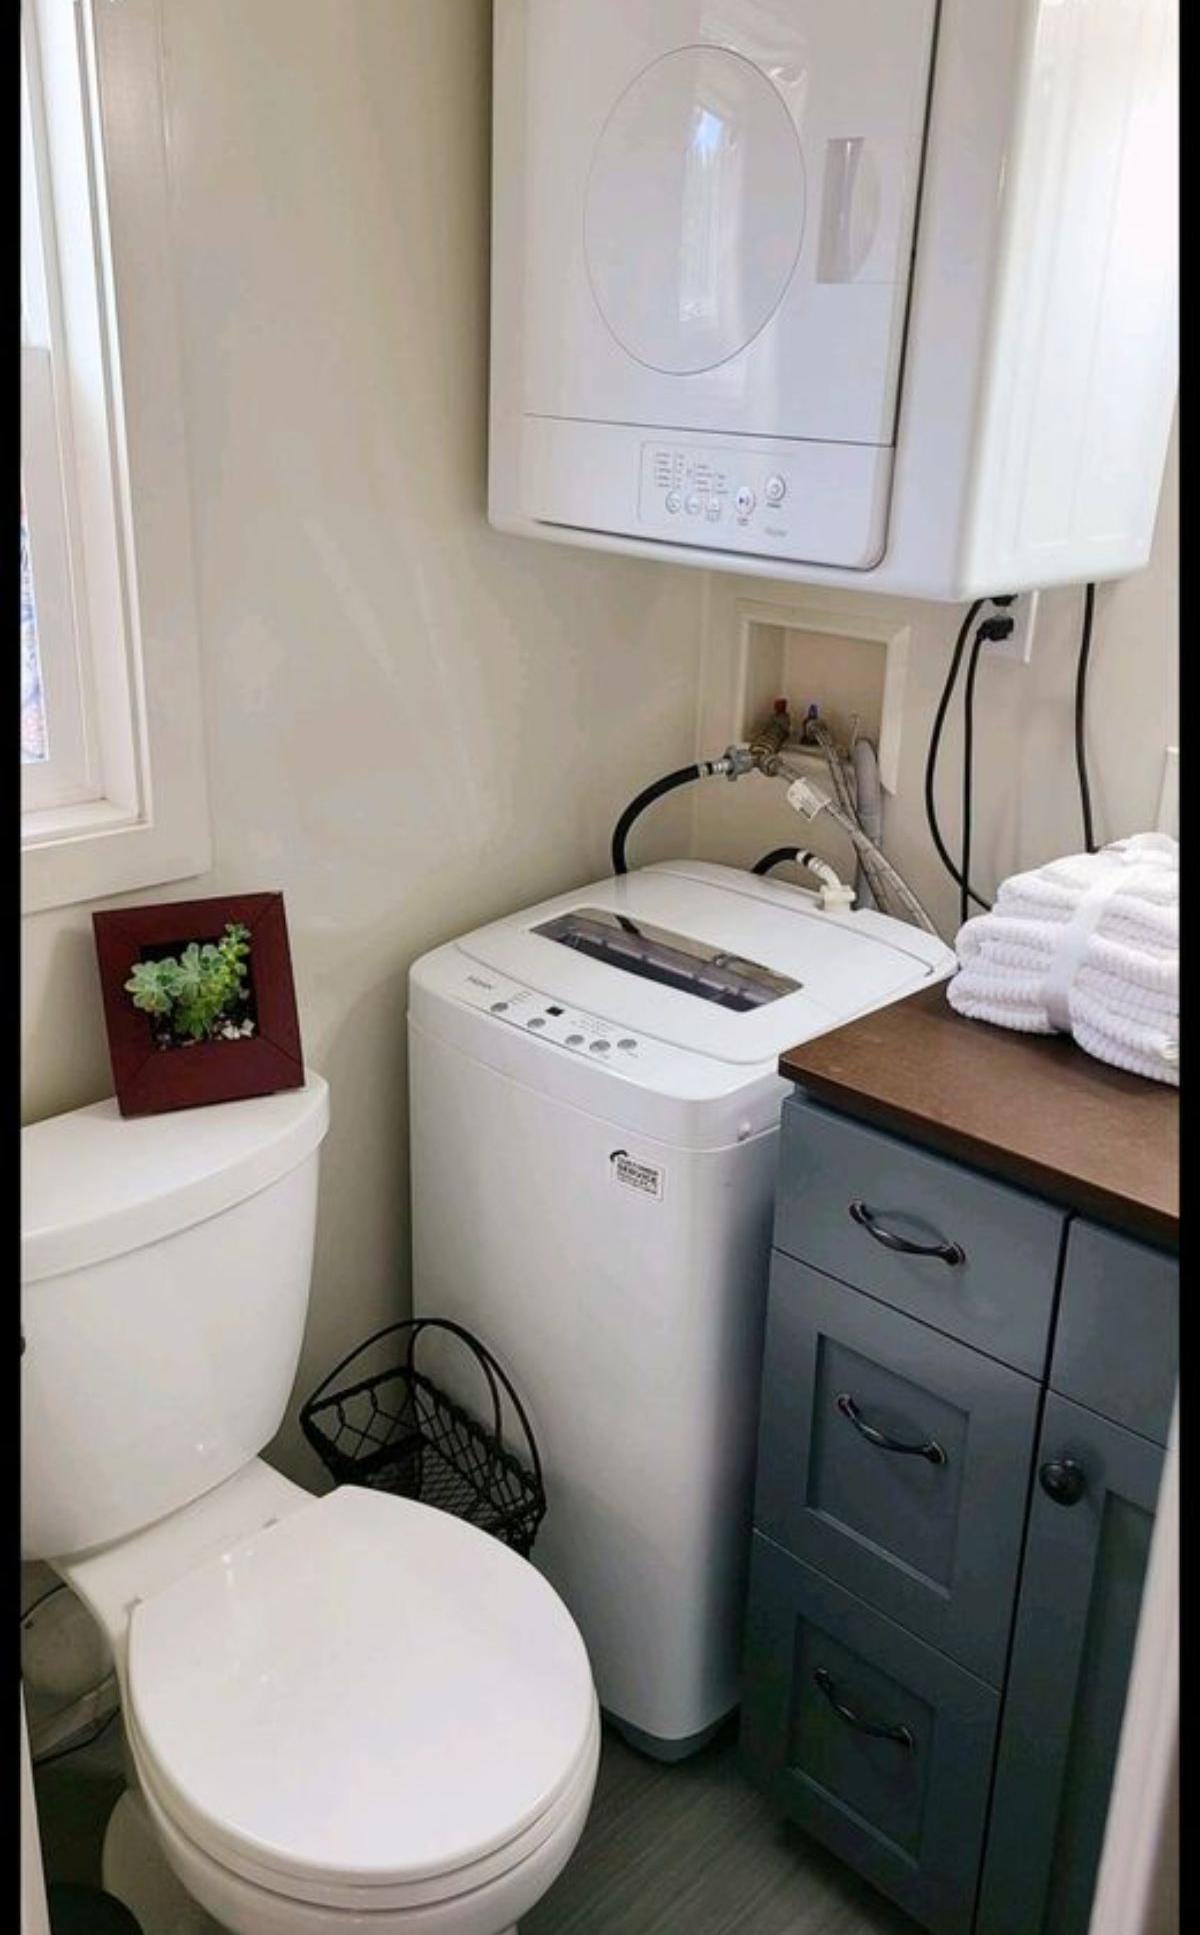 standard fittings with washer dryer combo included in the deal